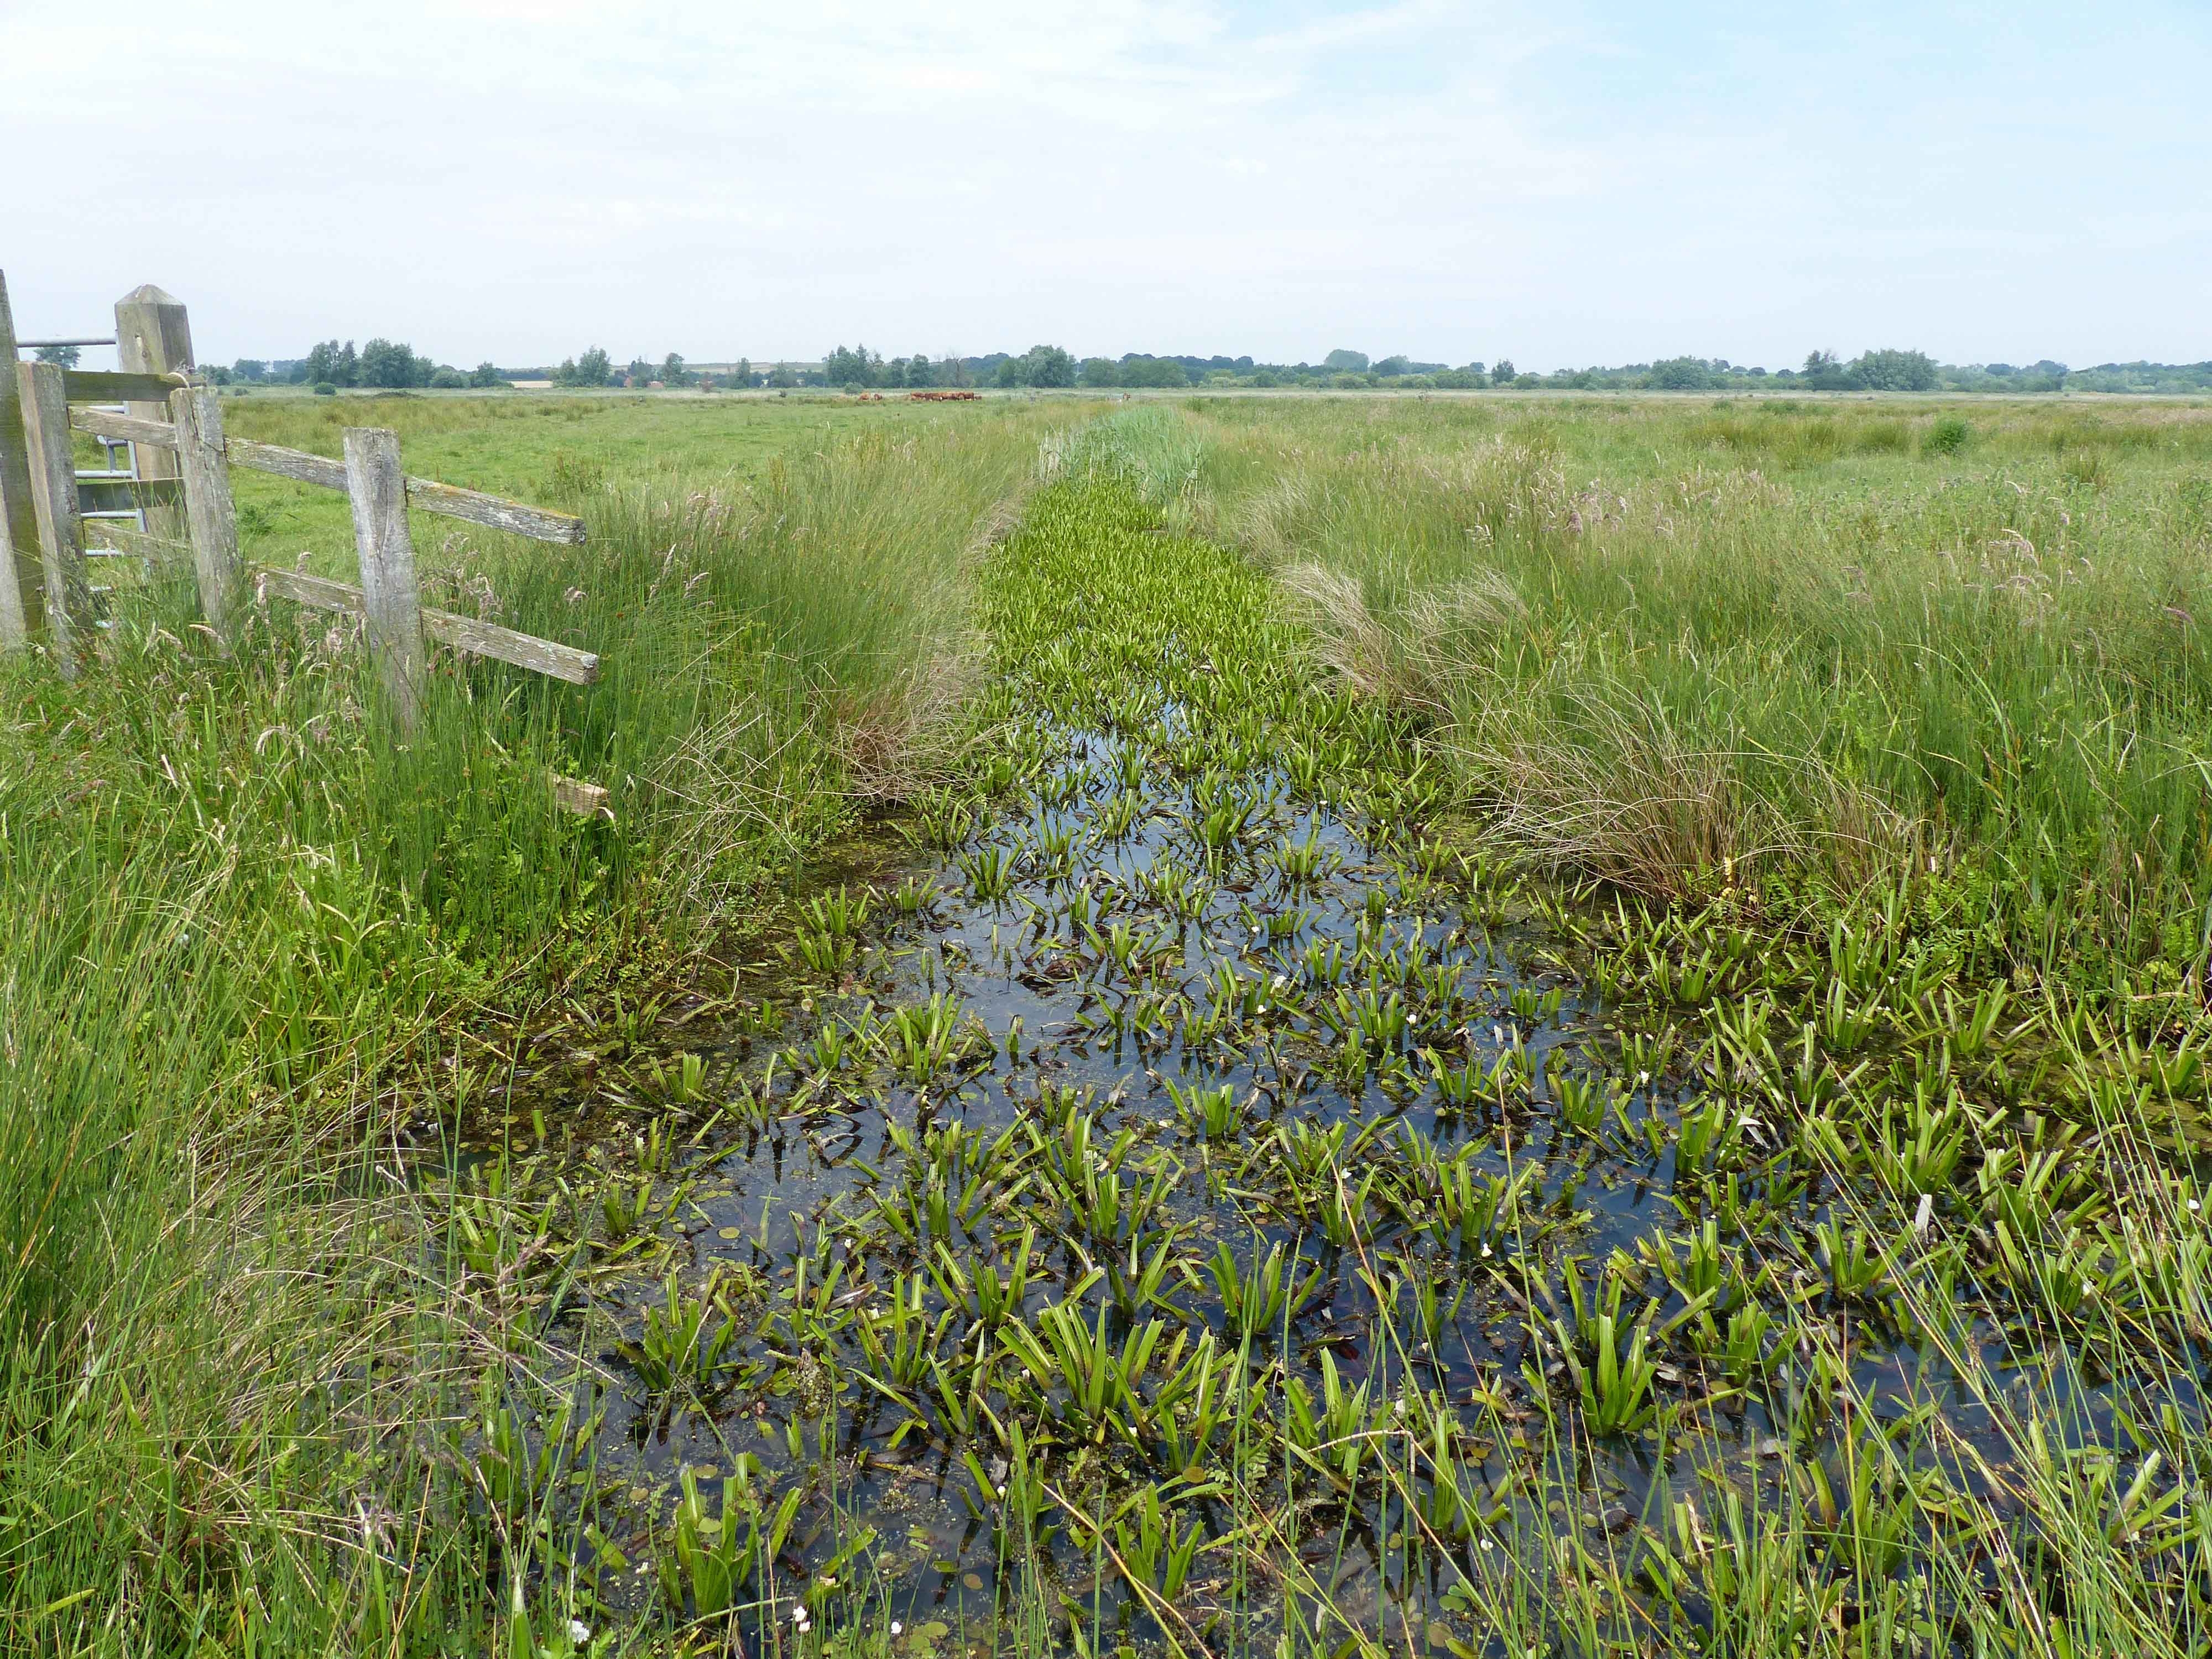 Grazing marsh ditch habitat typical of D. plantarius in Britain and the Netherlands